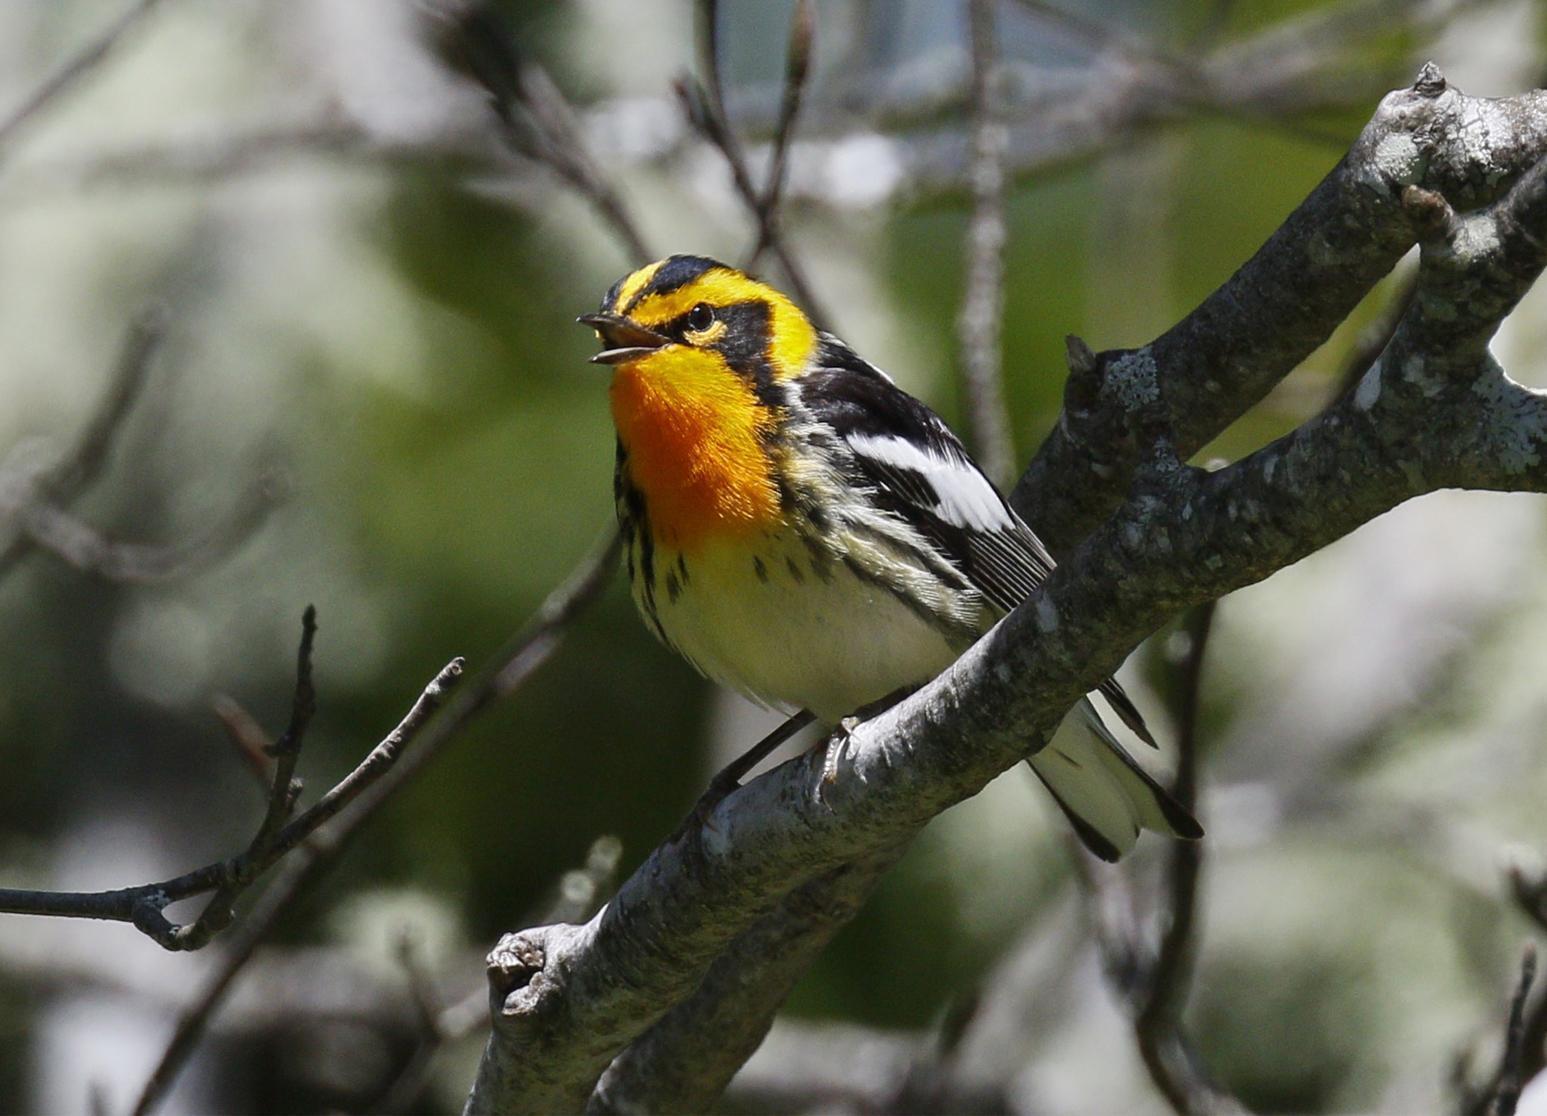 Blackburnian Warbler Photo by Emily Willoughby